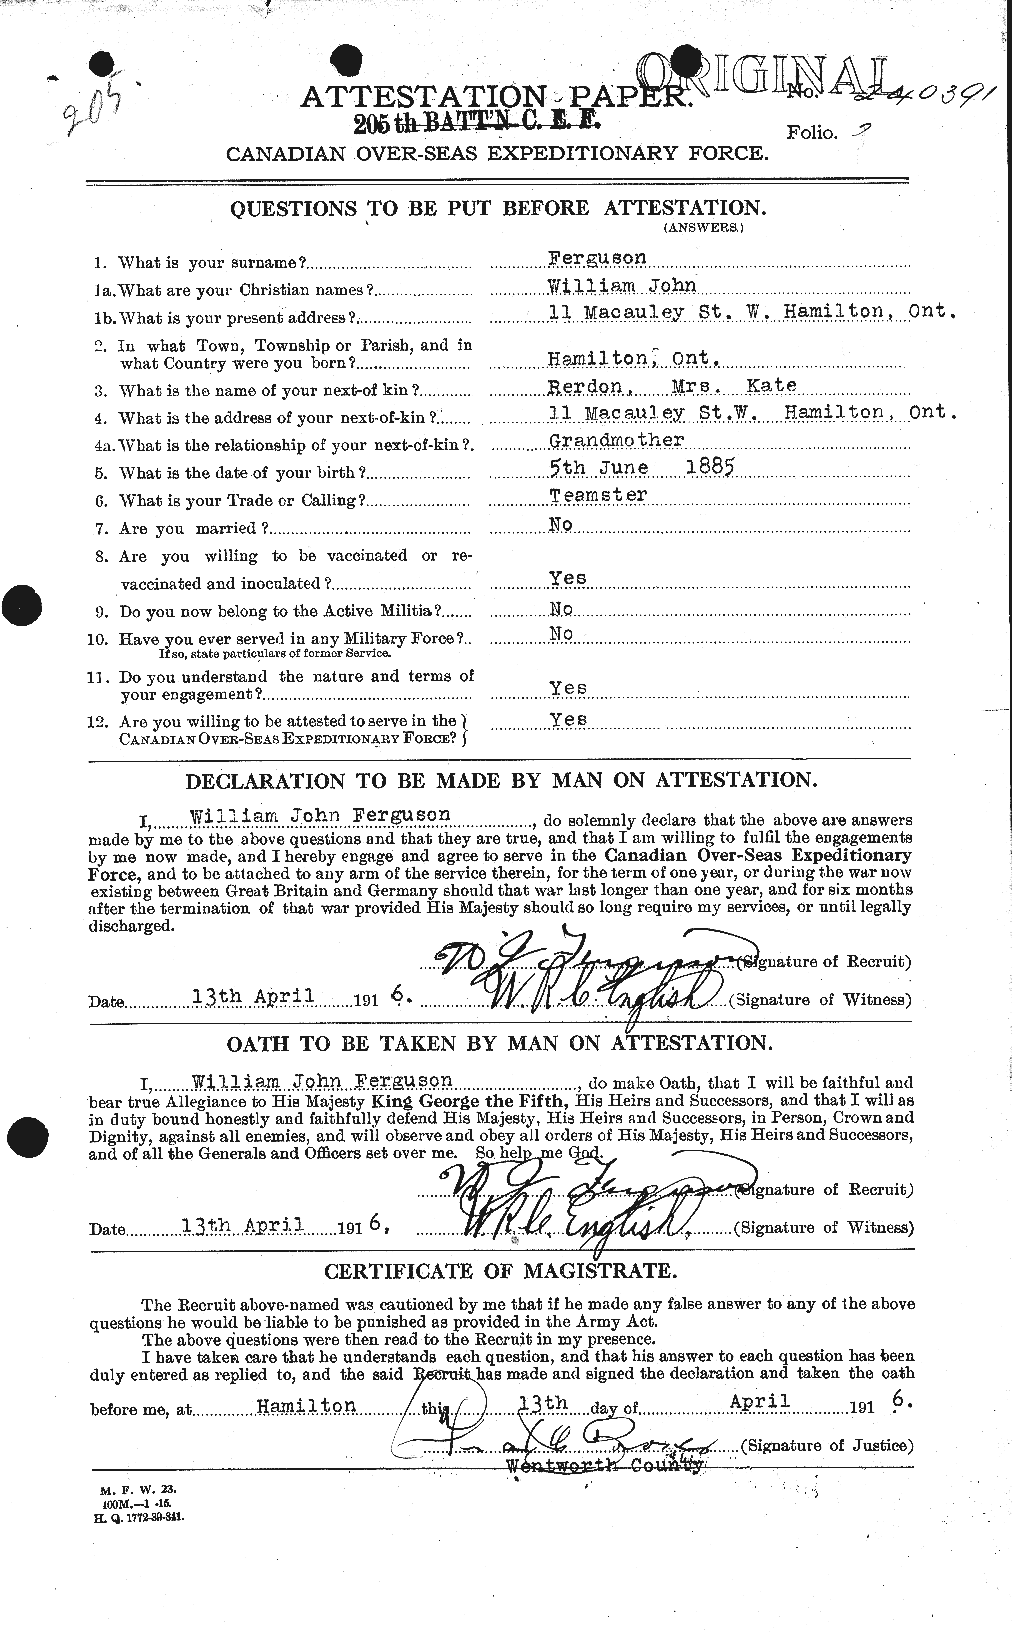 Personnel Records of the First World War - CEF 322119a